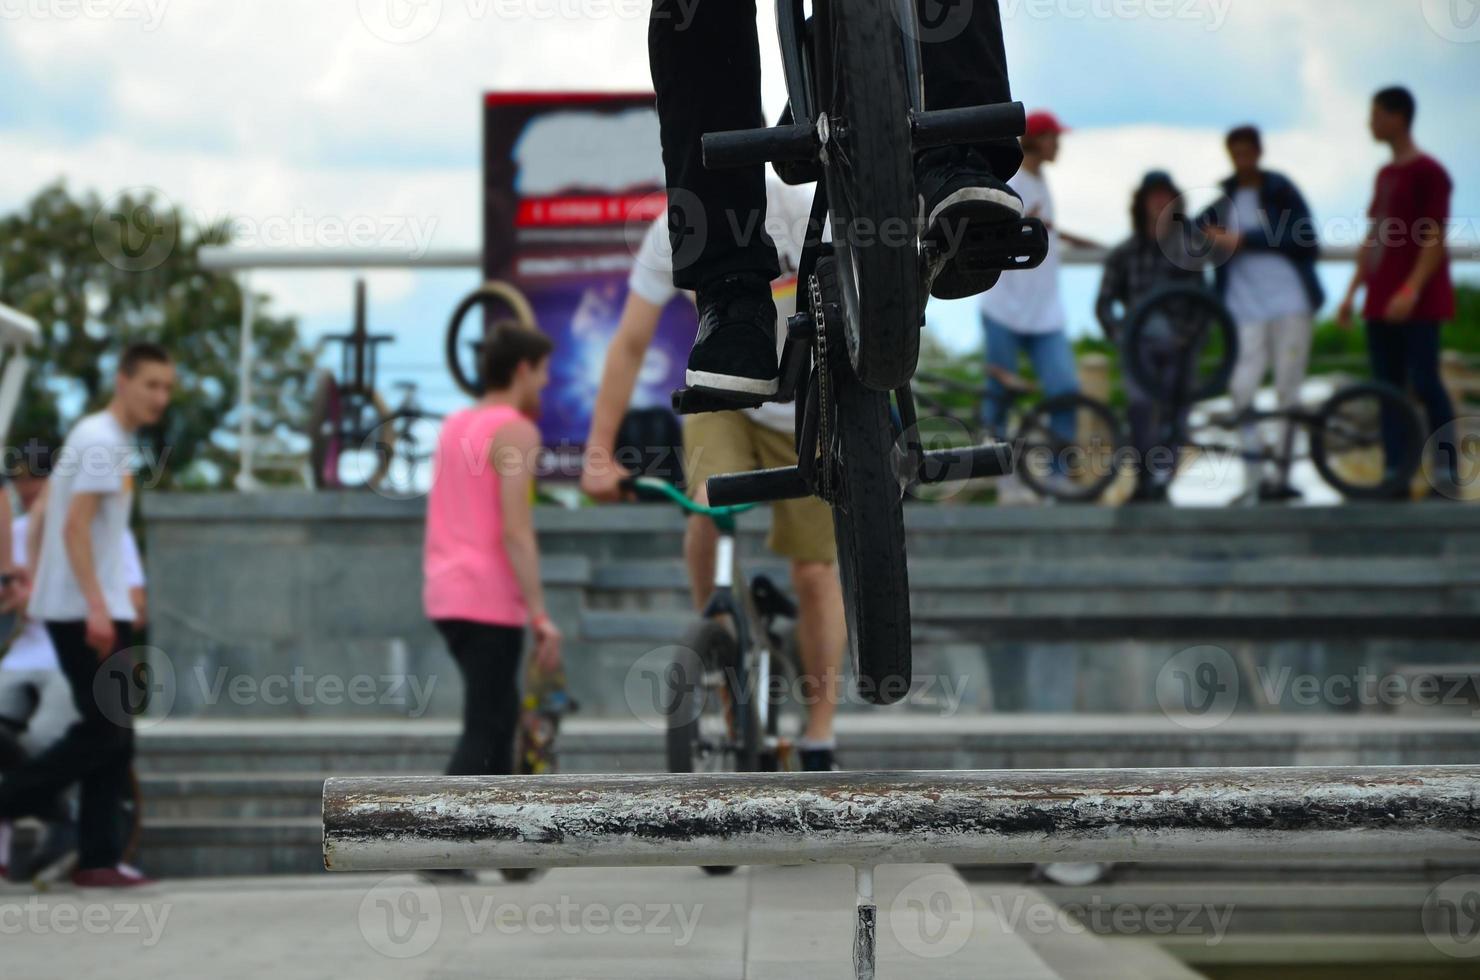 A cyclist jumps over a pipe on a BMX bike. A lot of people with bicycles in the background. Extreme sports concept photo